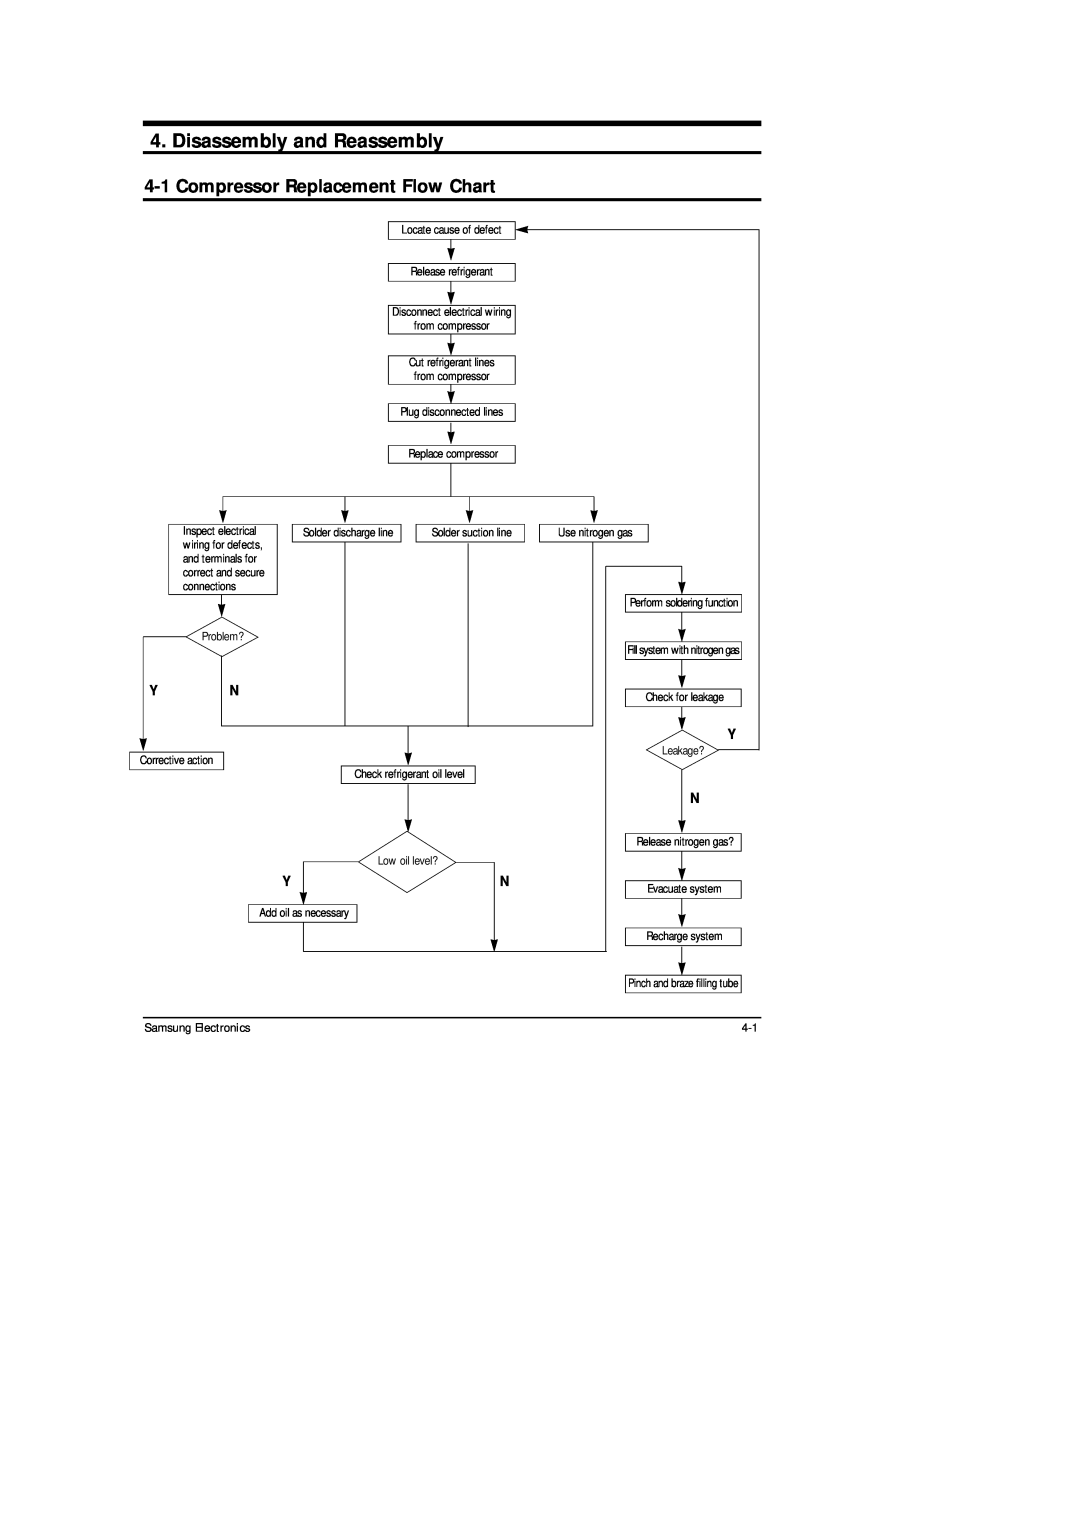 Samsung AW05B05A(AW0500 Disassembly and Reassembly, 4-1Compressor Replacement Flow Chart, Samsung Electronics 